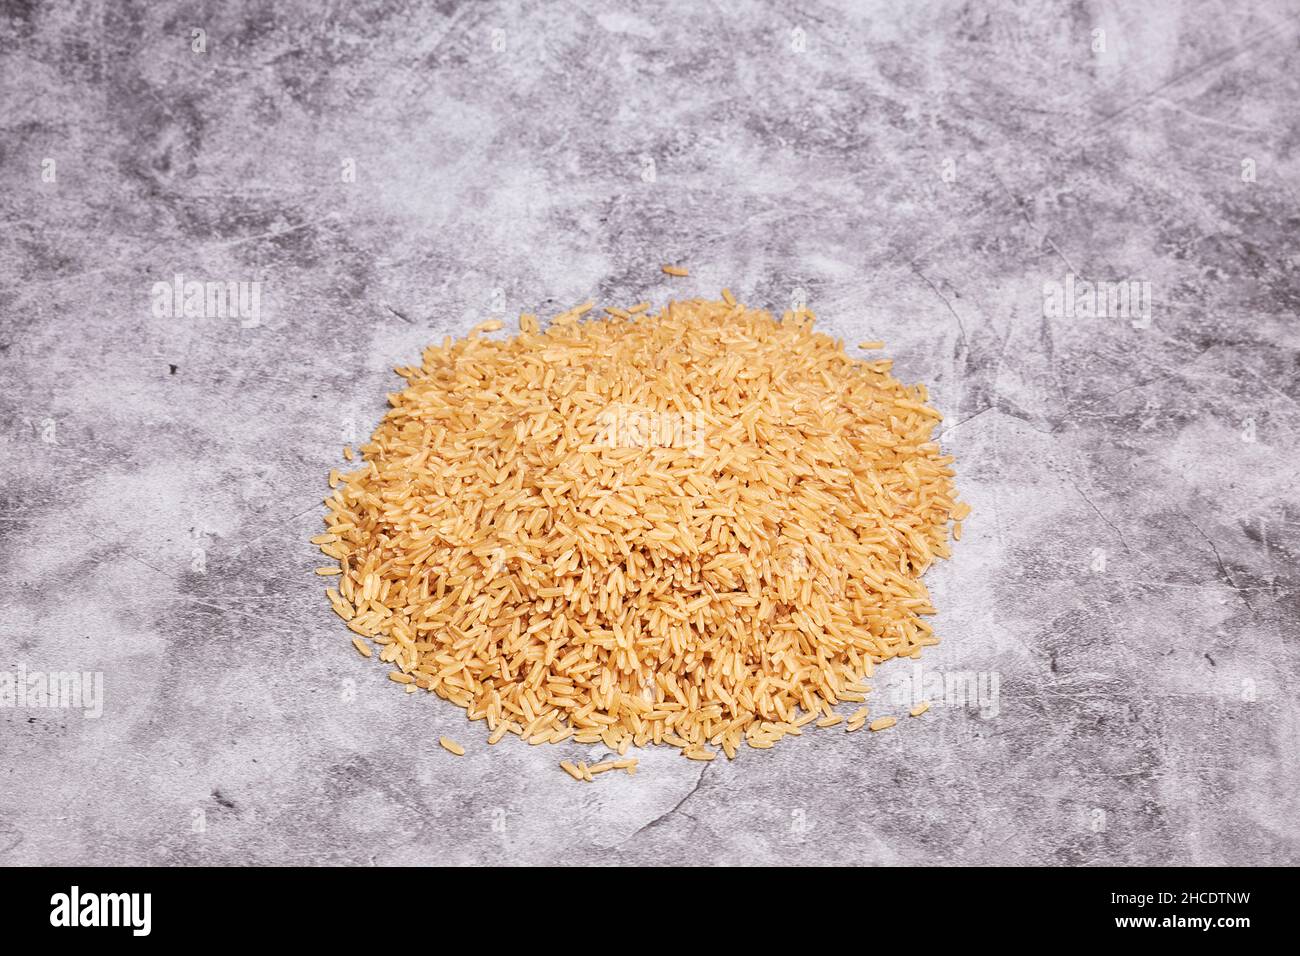 Pile of uncooked rice on a gray stone background. Asian food. Healthy food concept Stock Photo